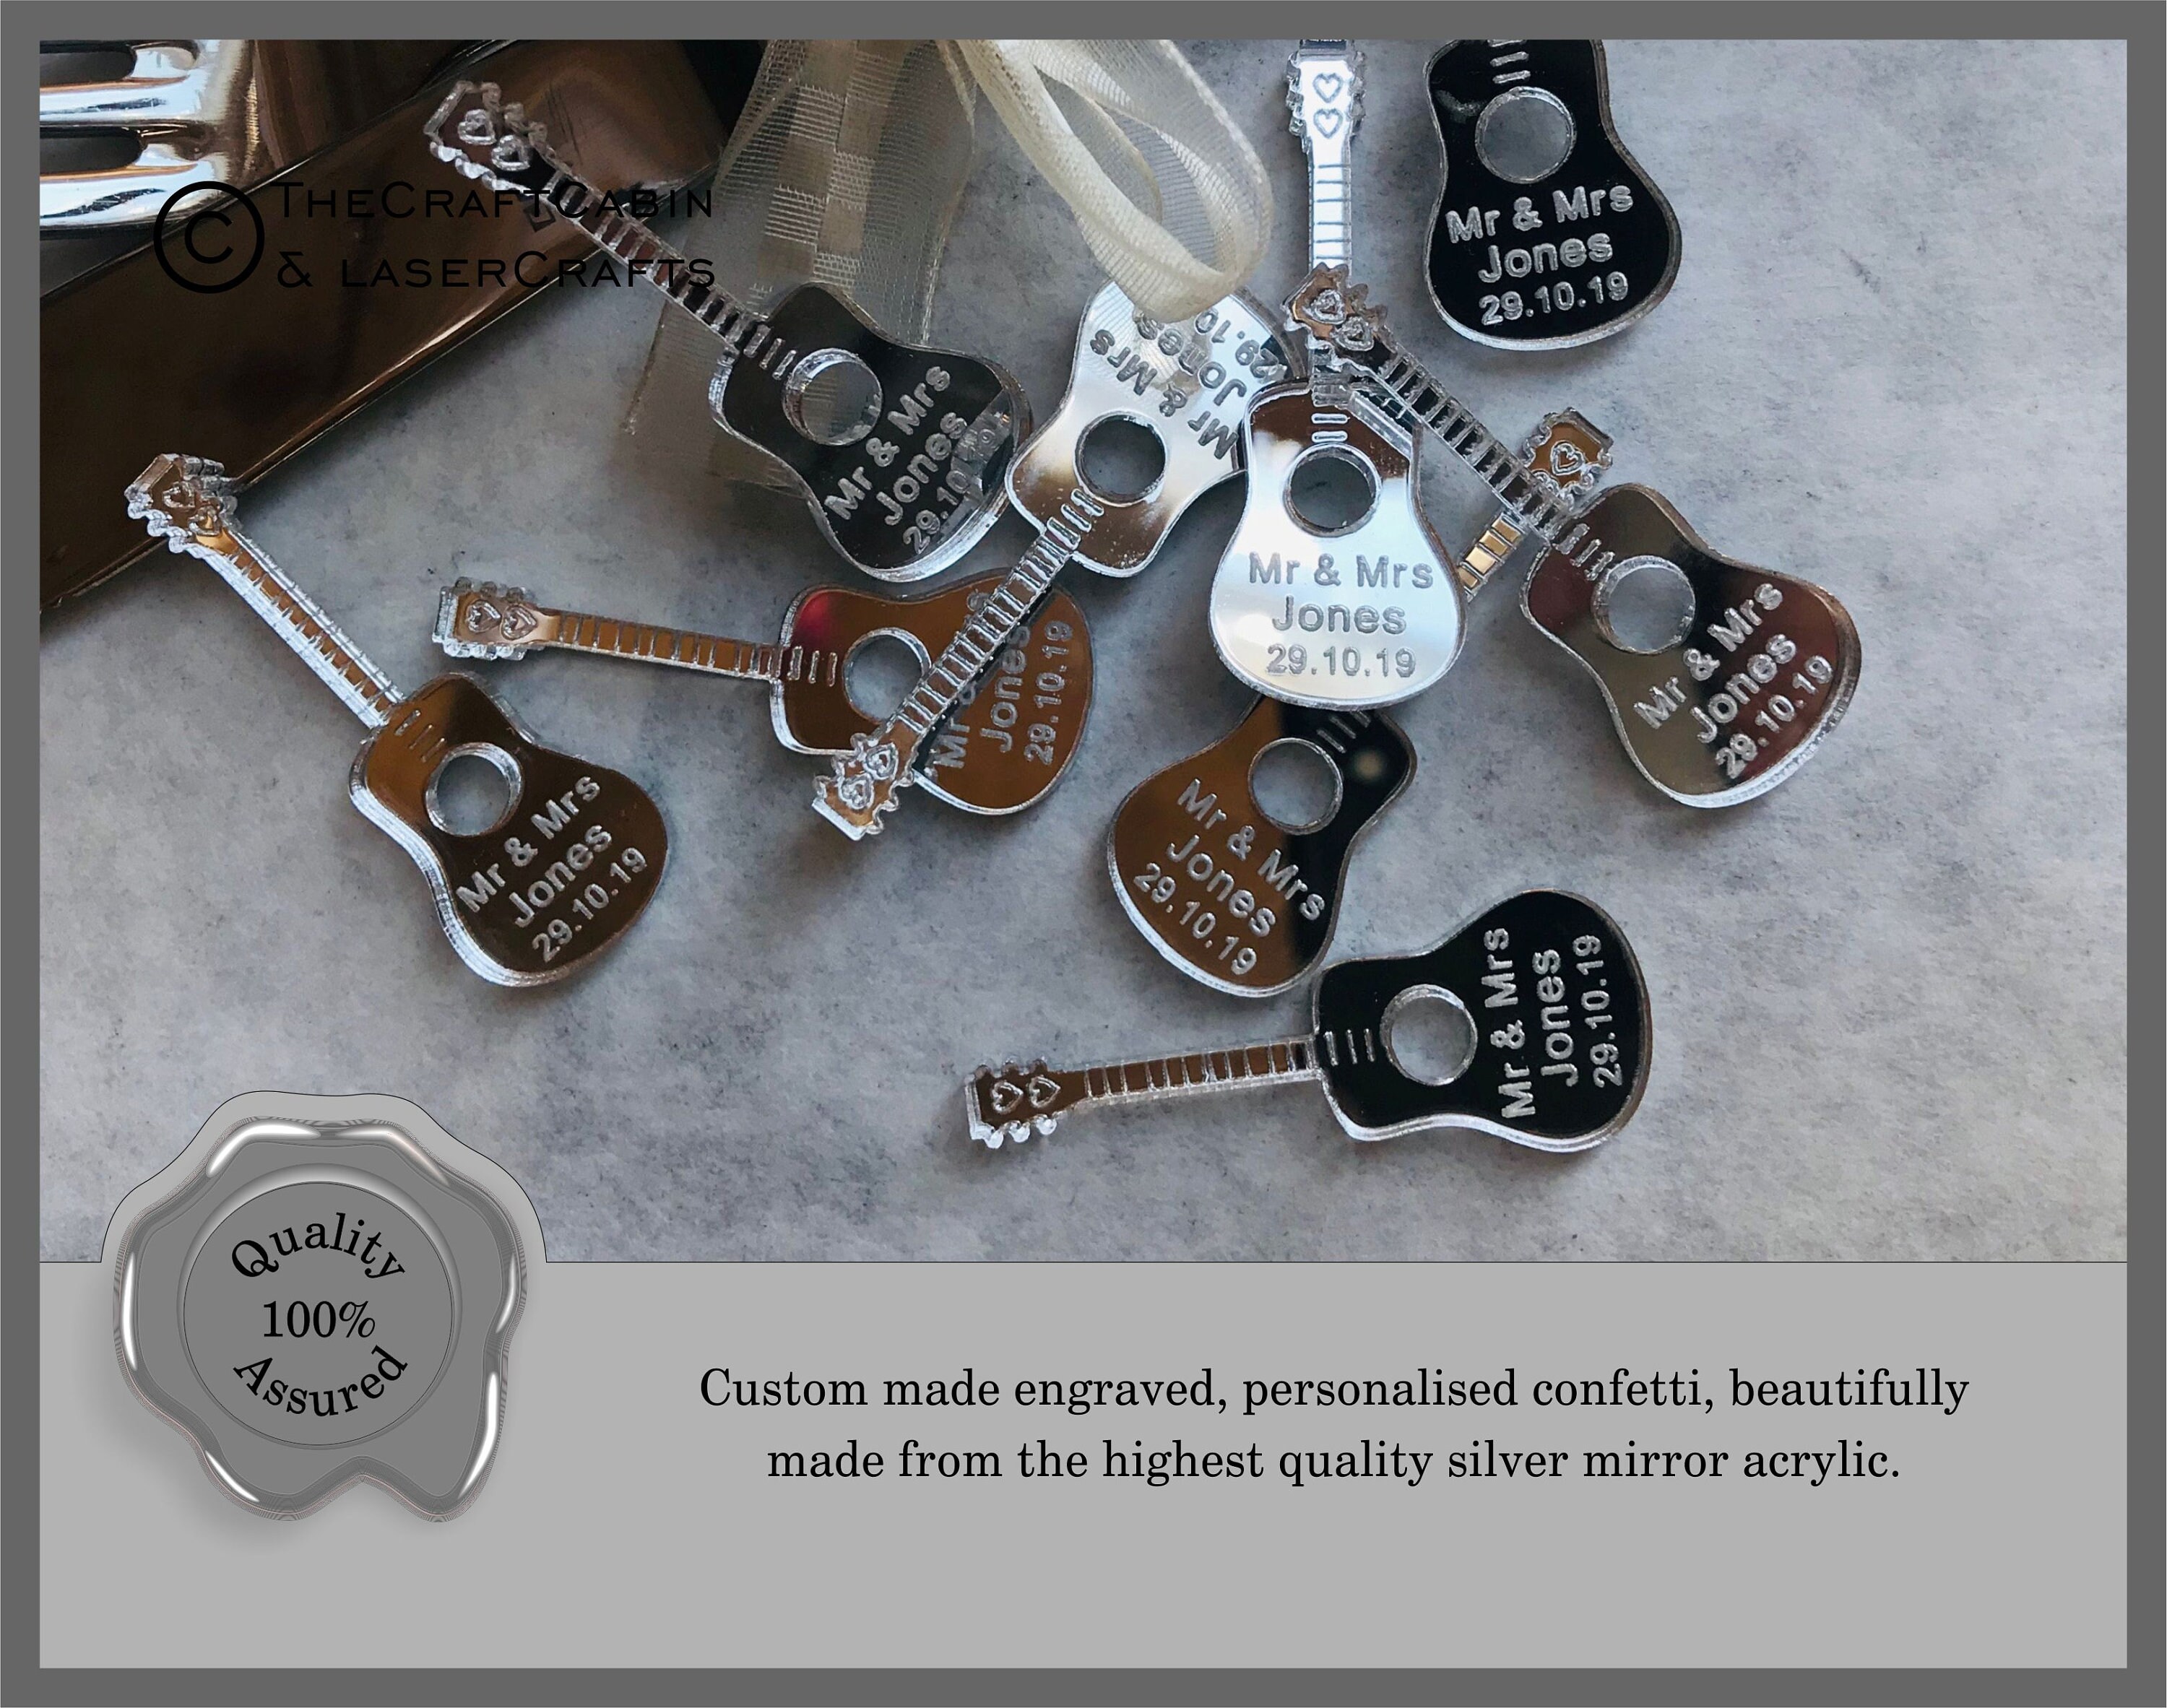 Acoustic Guitar Personalised Confetti Wedding Favours Mr